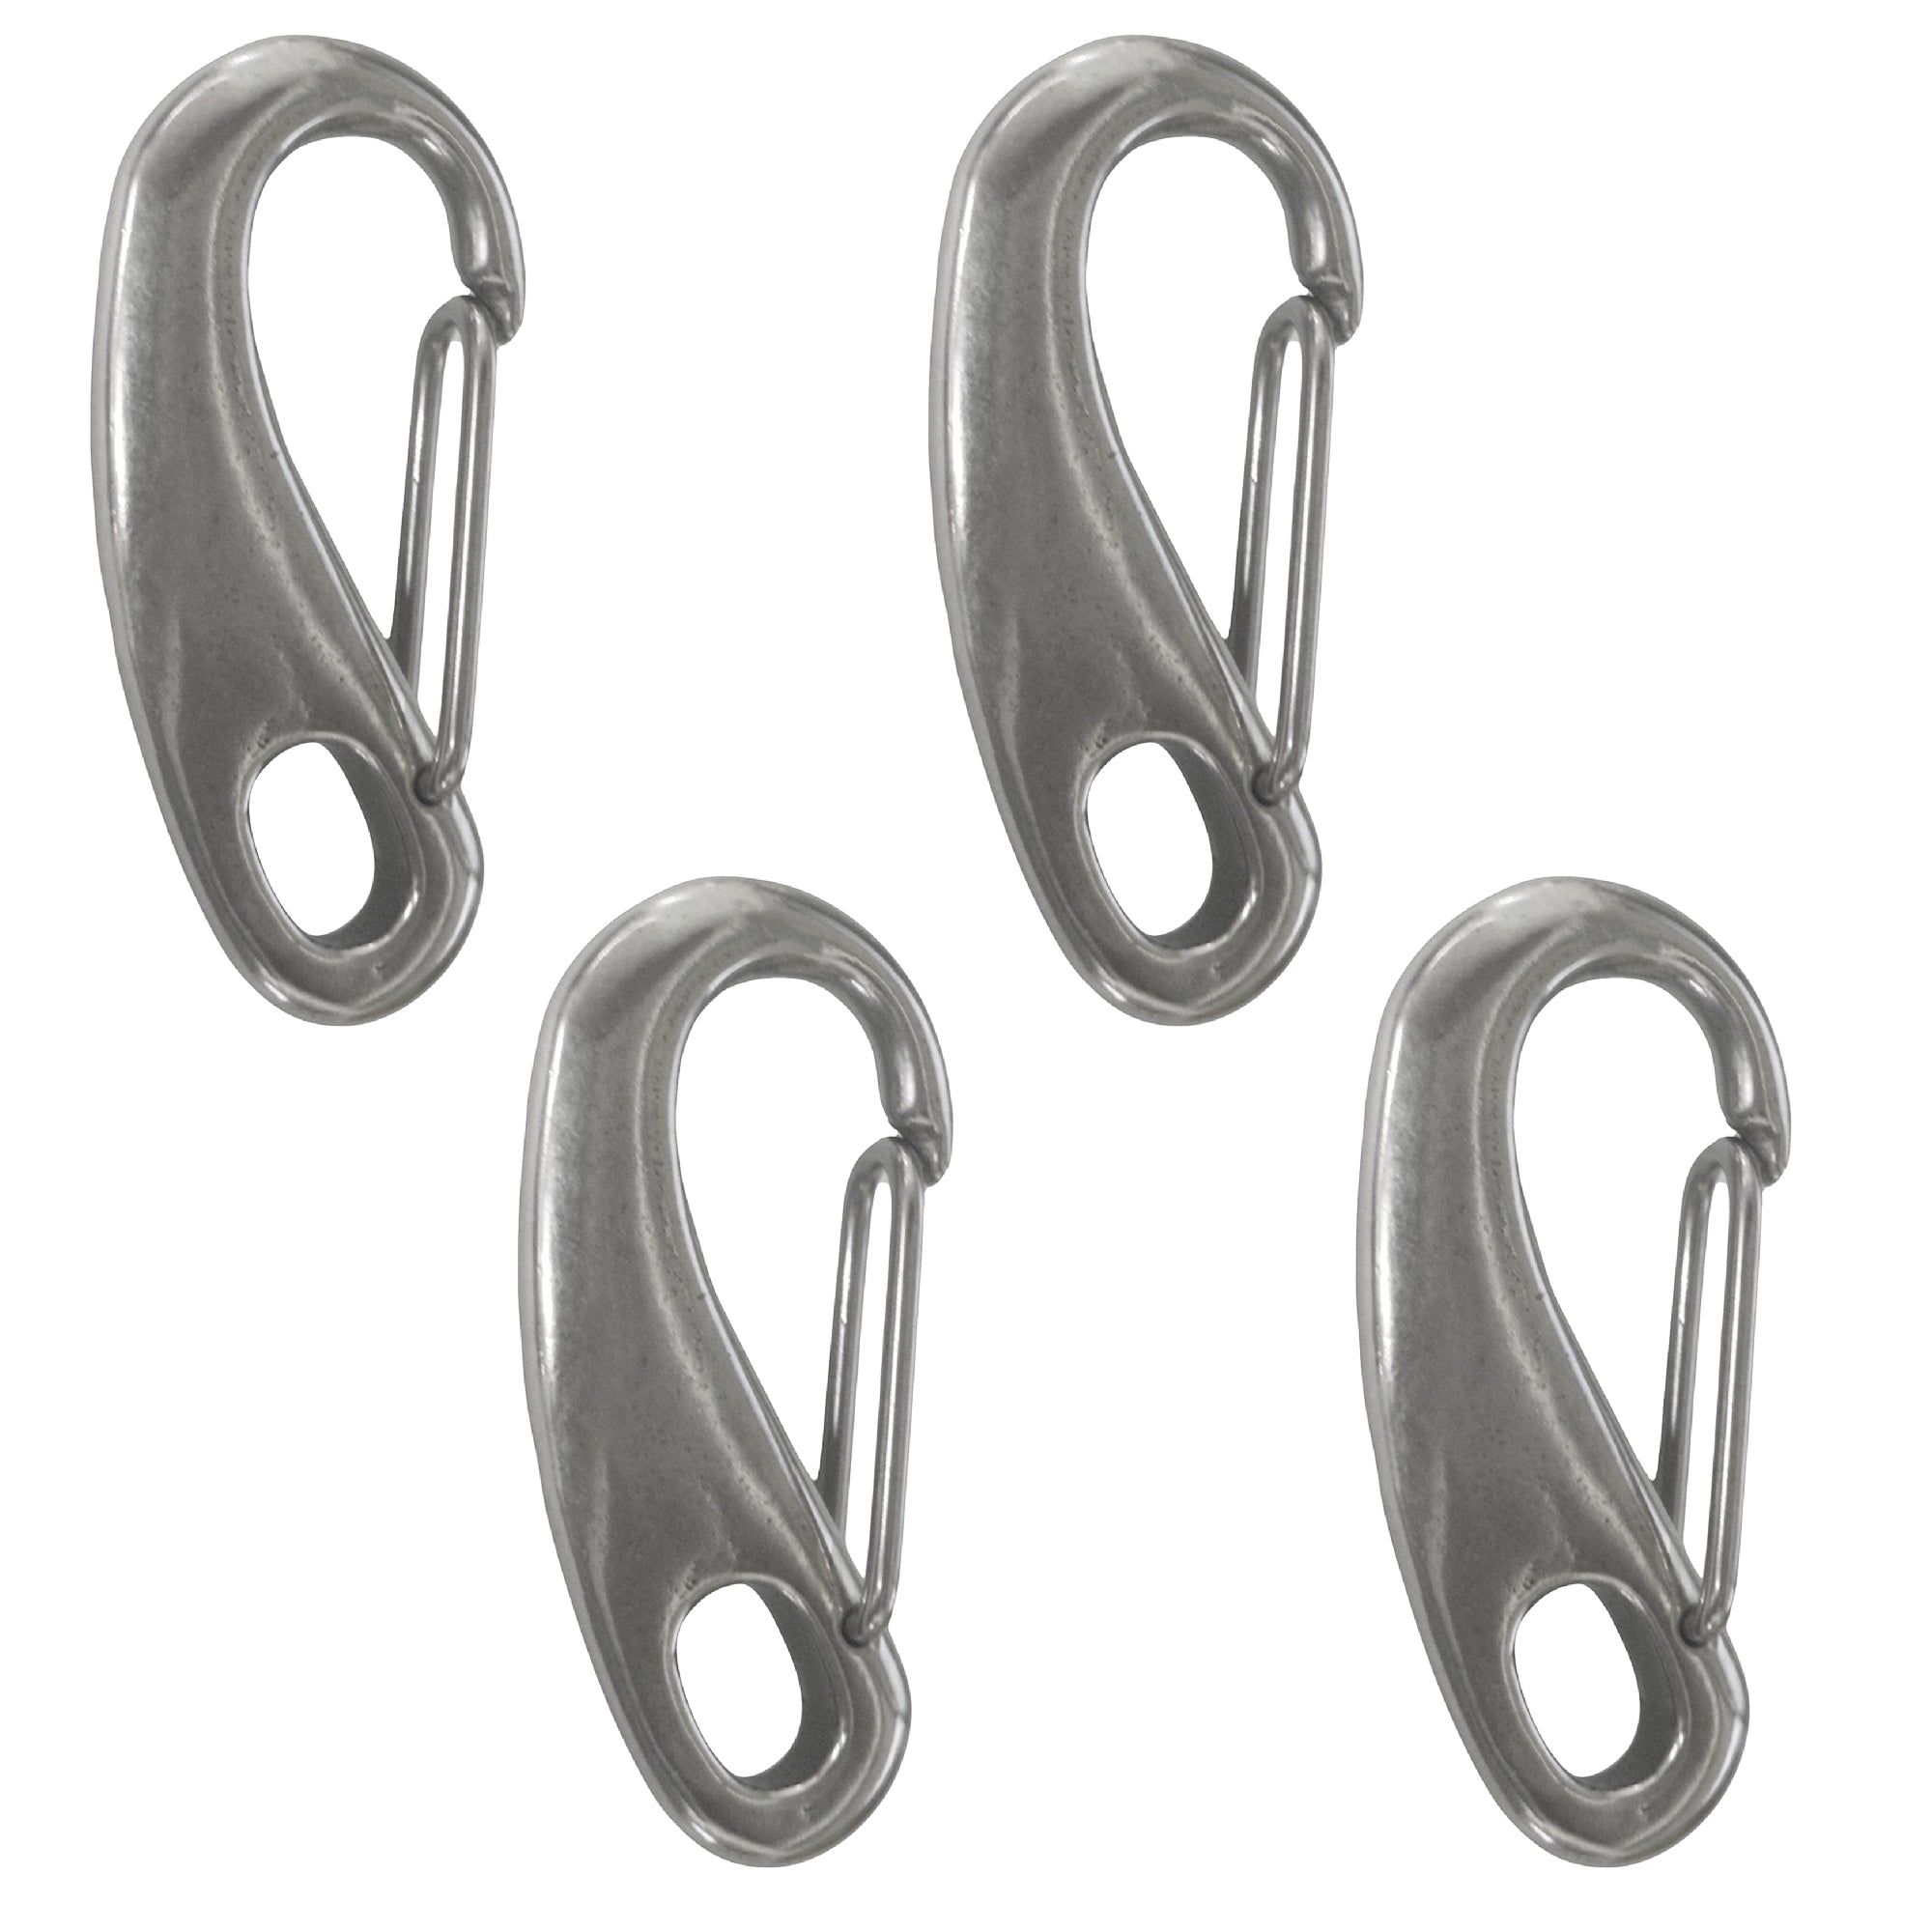 Spring Gate Snap Hook, 2" Stainless Steel 4-Pack - FO461-M4